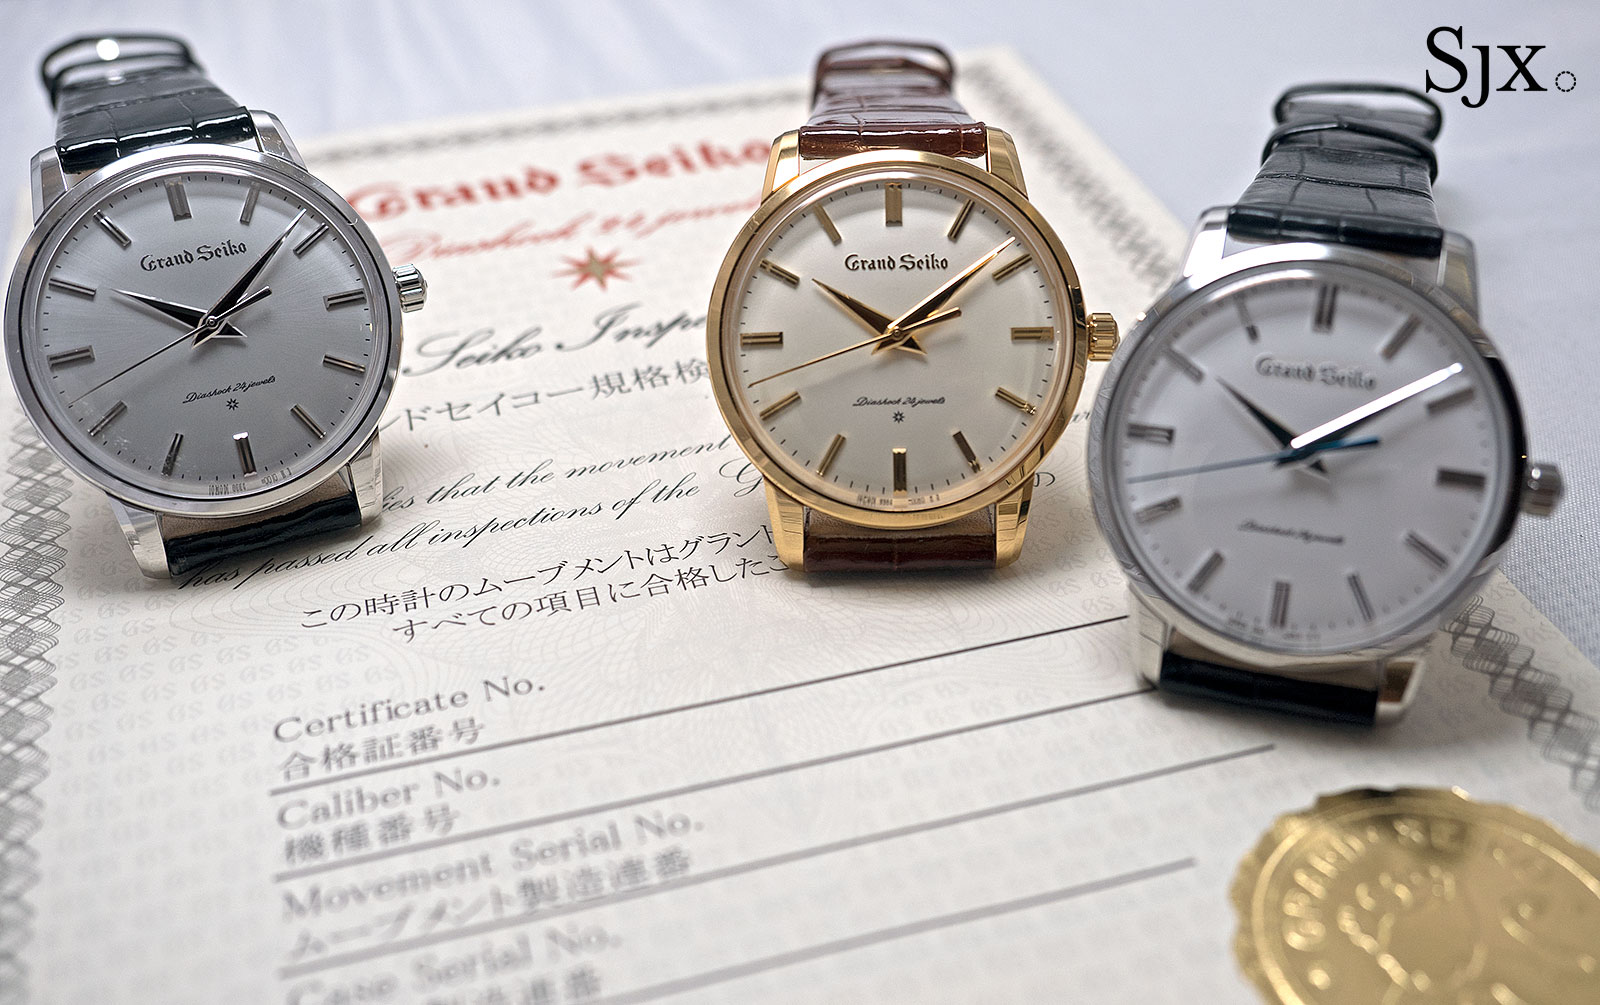 Hands-On with the Grand Seiko SBGW251, SBGW2512, SBGW253, Reissue of 1960's  Ref. 3180 | SJX Watches